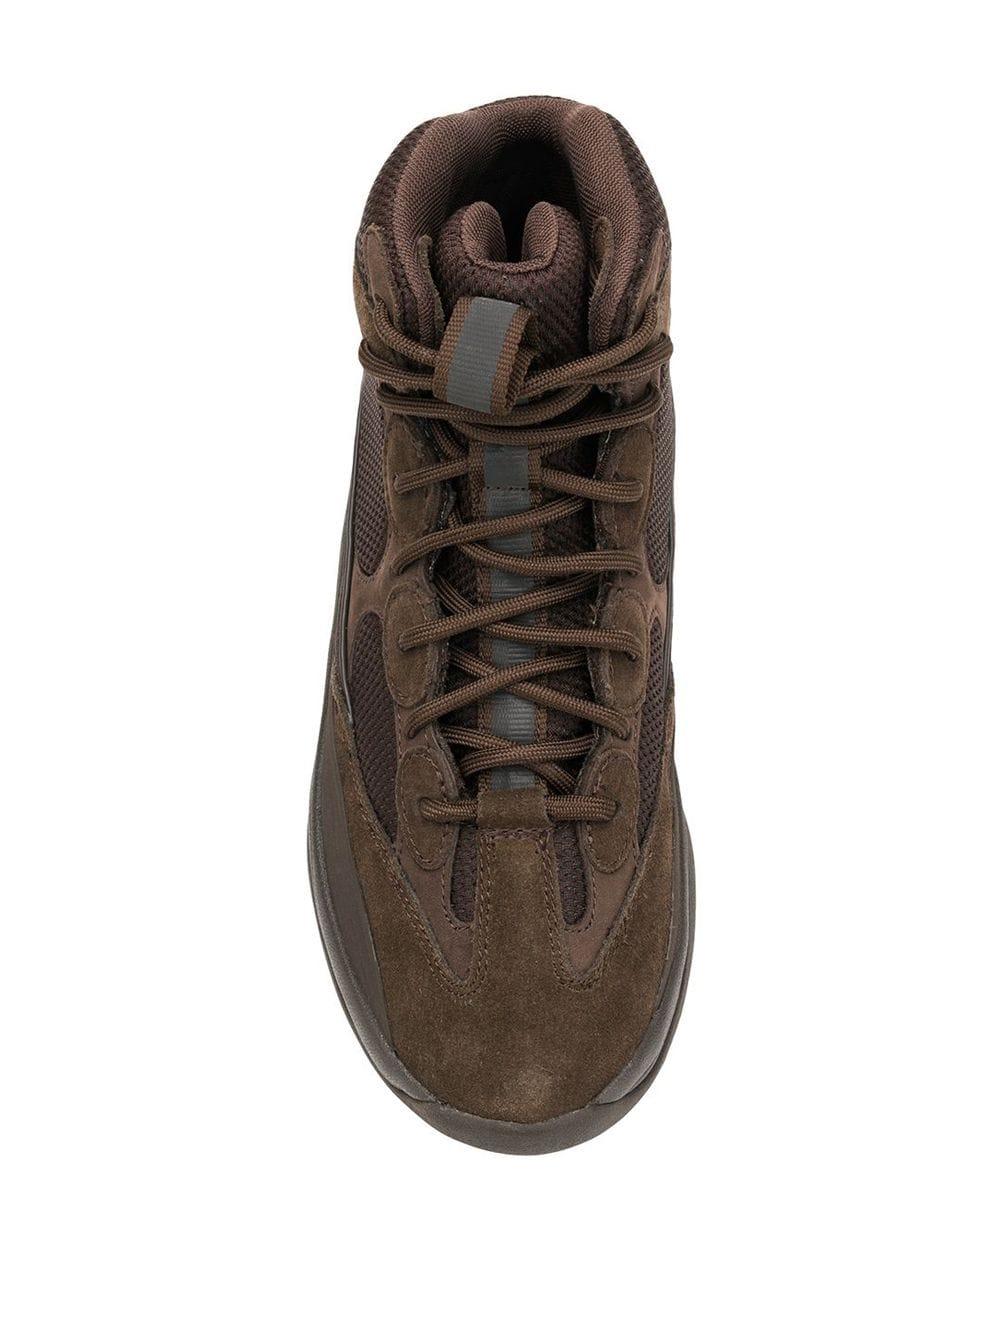 brown yeezy boots